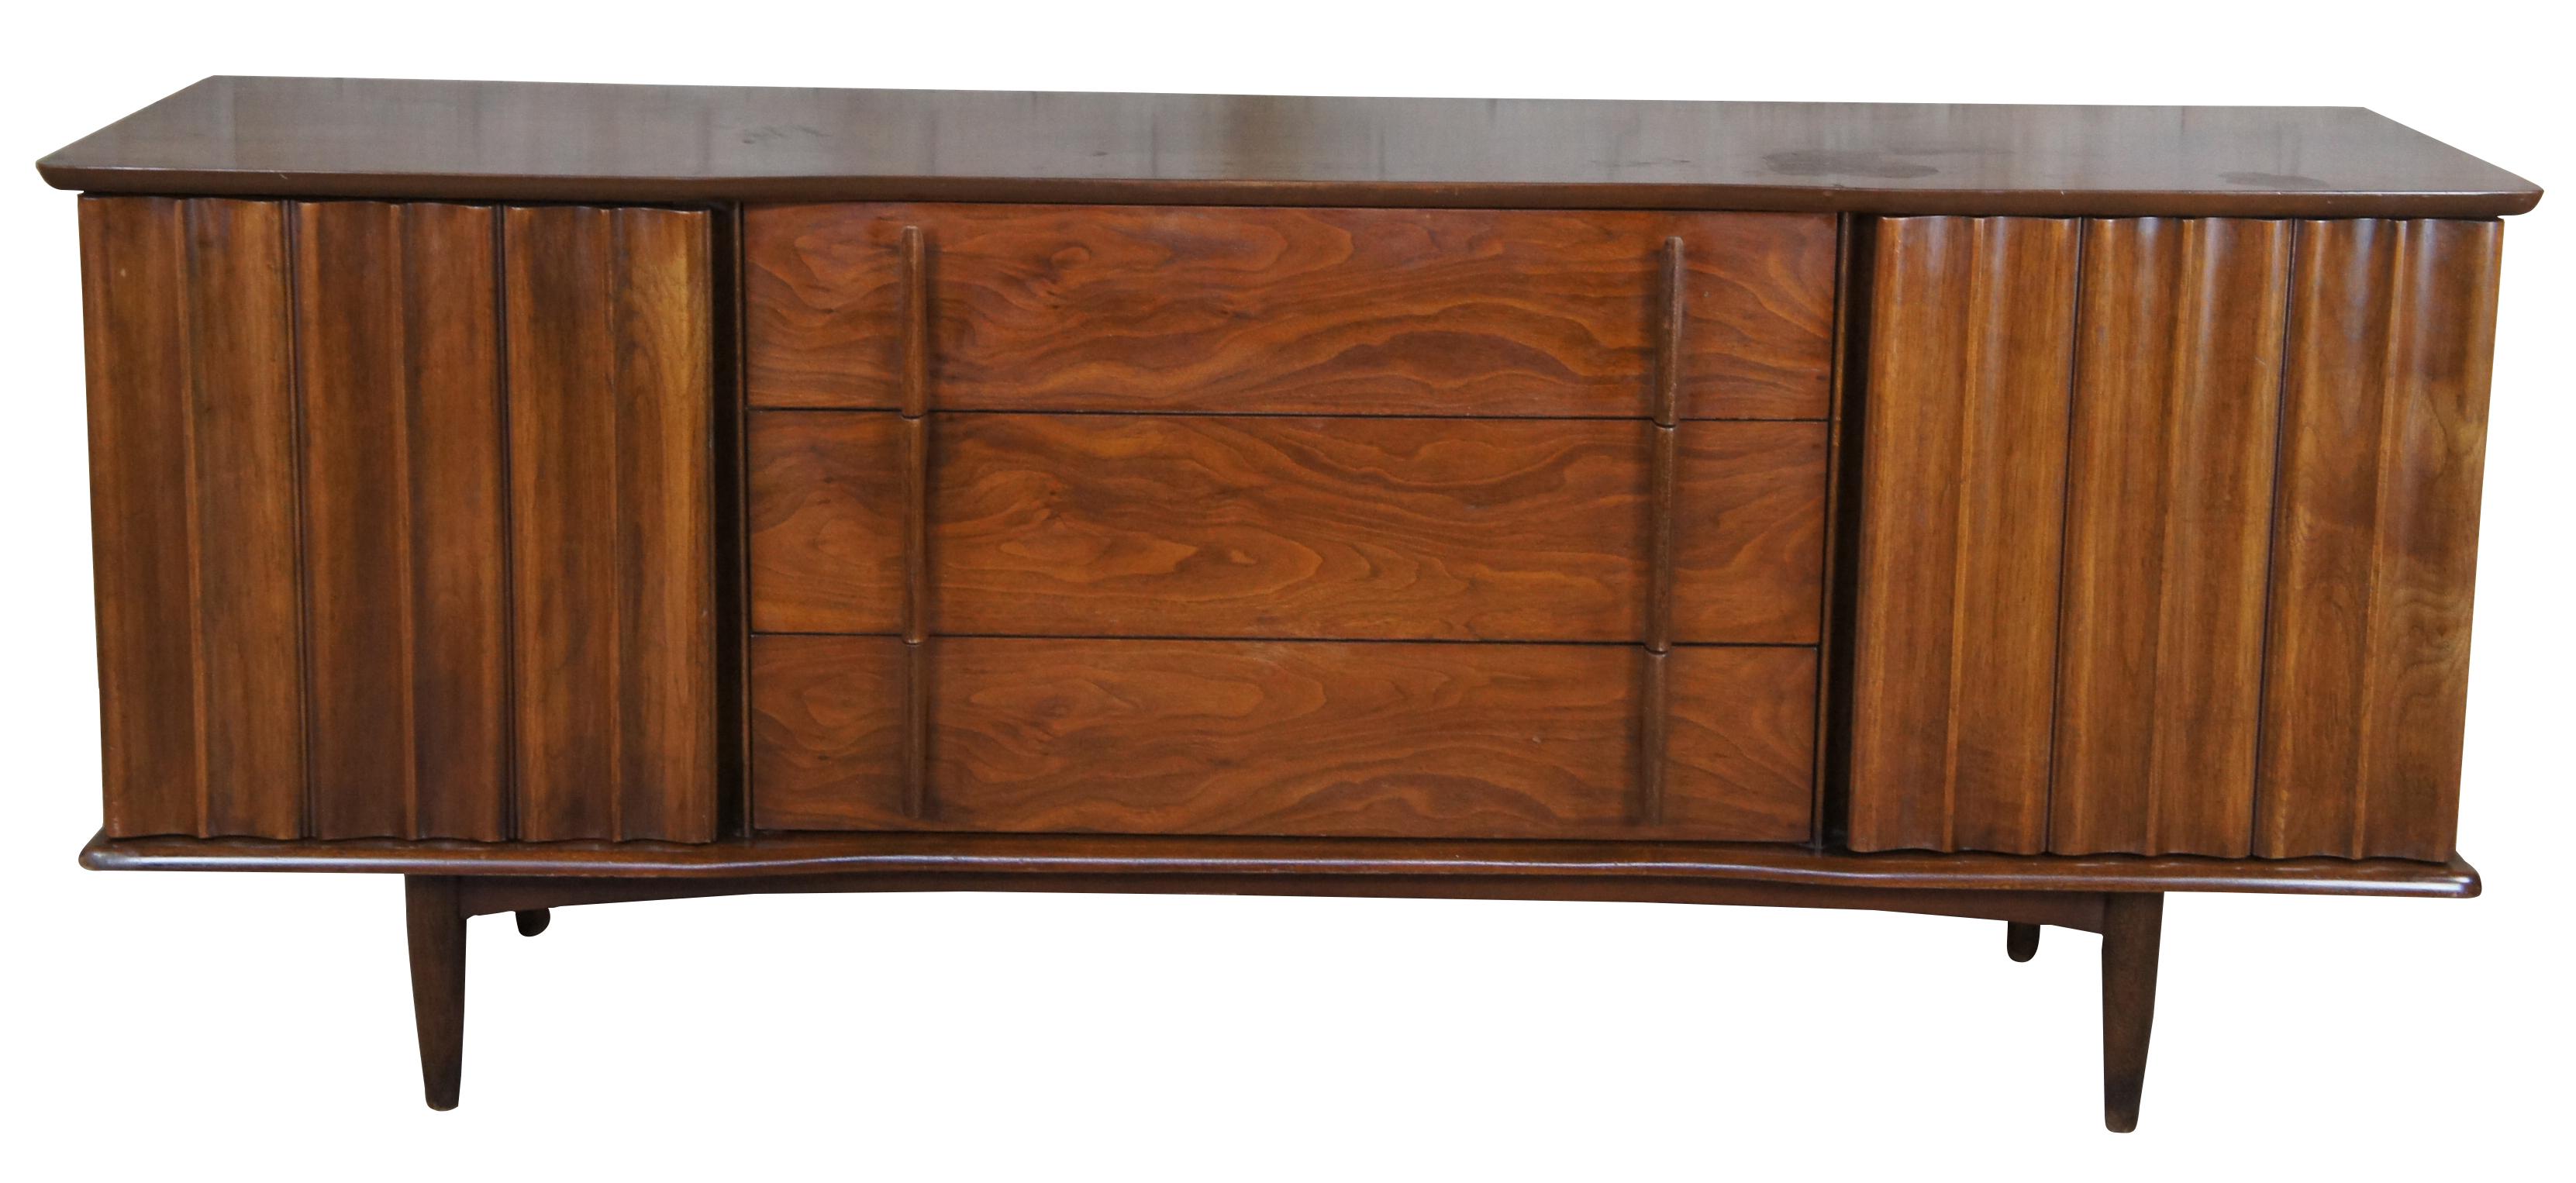 An exceptional Mid-Century Modern dresser & mirror or console by United Furniture Corporation, circa 1961. Made from walnut with a sculptural front that conceals 6 drawers and mirror. Each drawer is dovetailed and made from solid oak. The dresser is